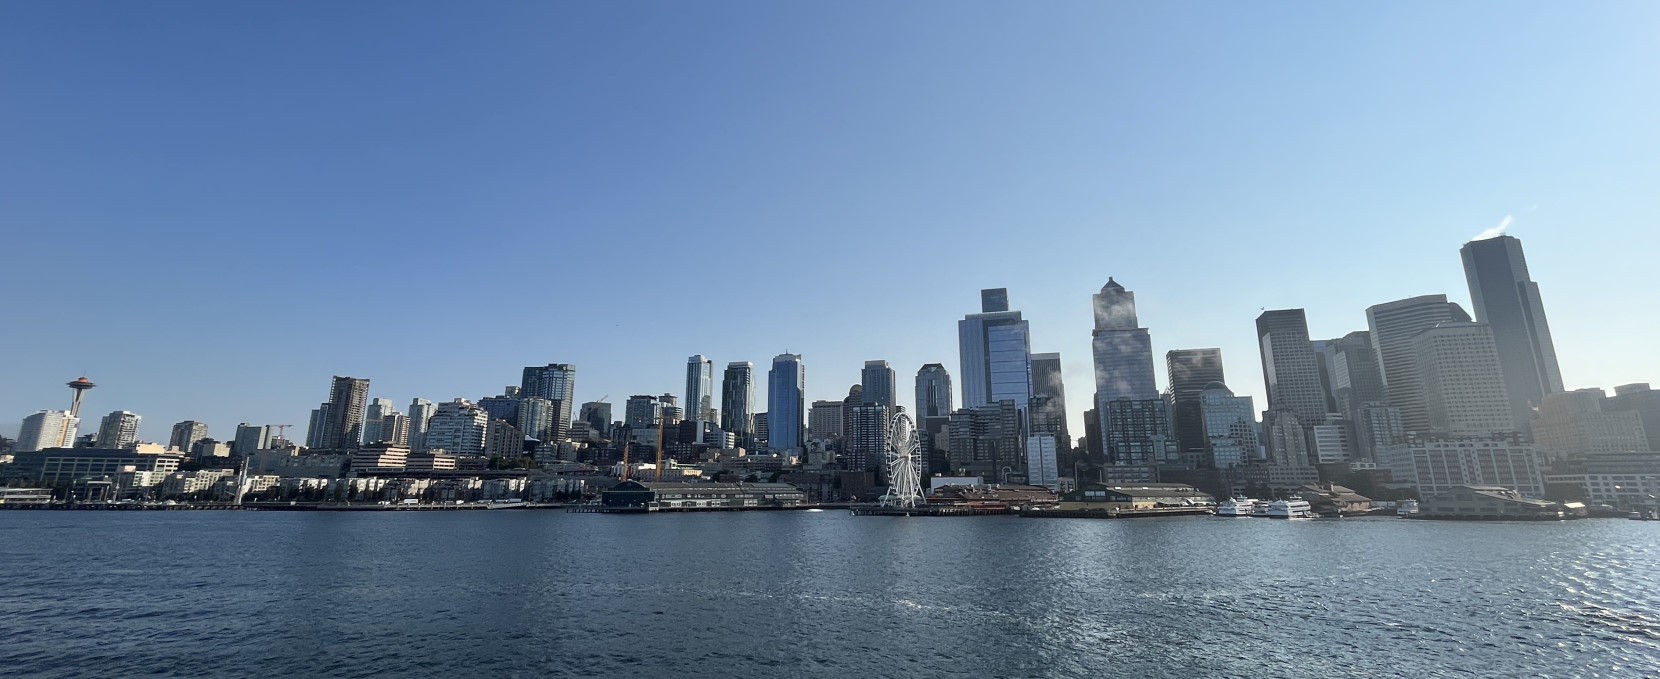 A view of Seattle’s skyline from a ferry on Puget Sound